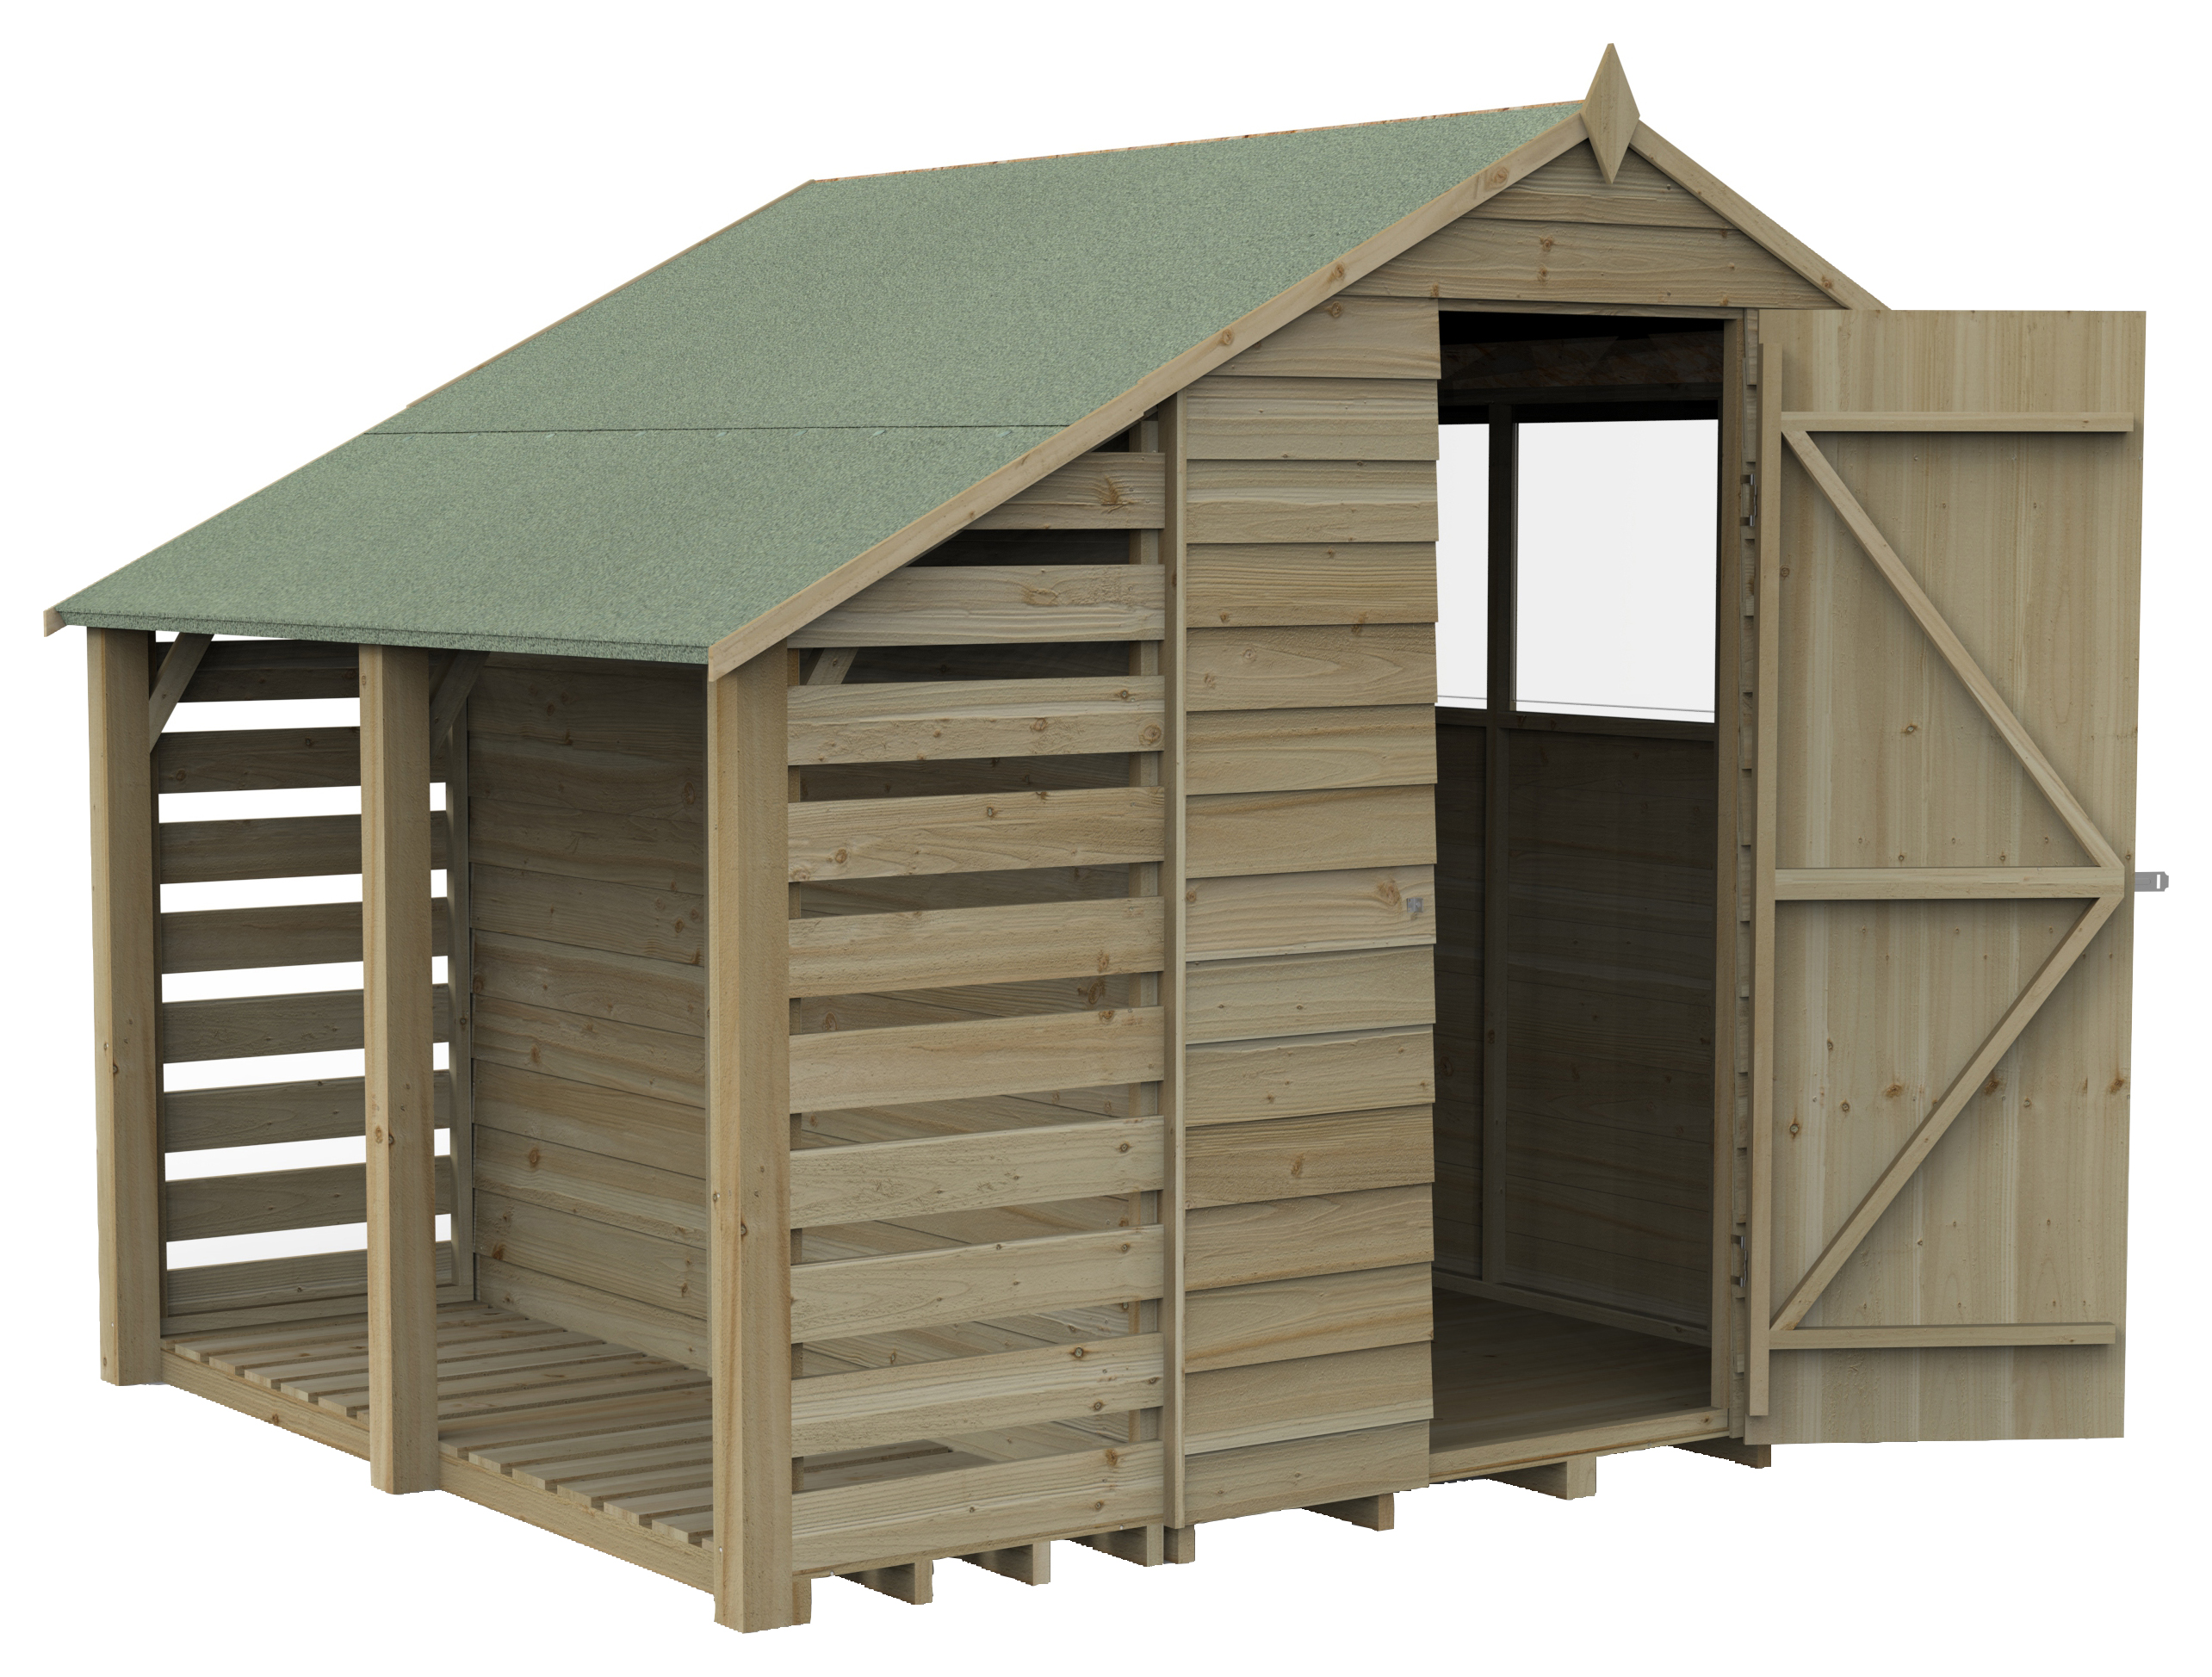 Image of Forest Garden 7 x 5ft 4Life Apex Overlap Pressure Treated Shed with Lean-To